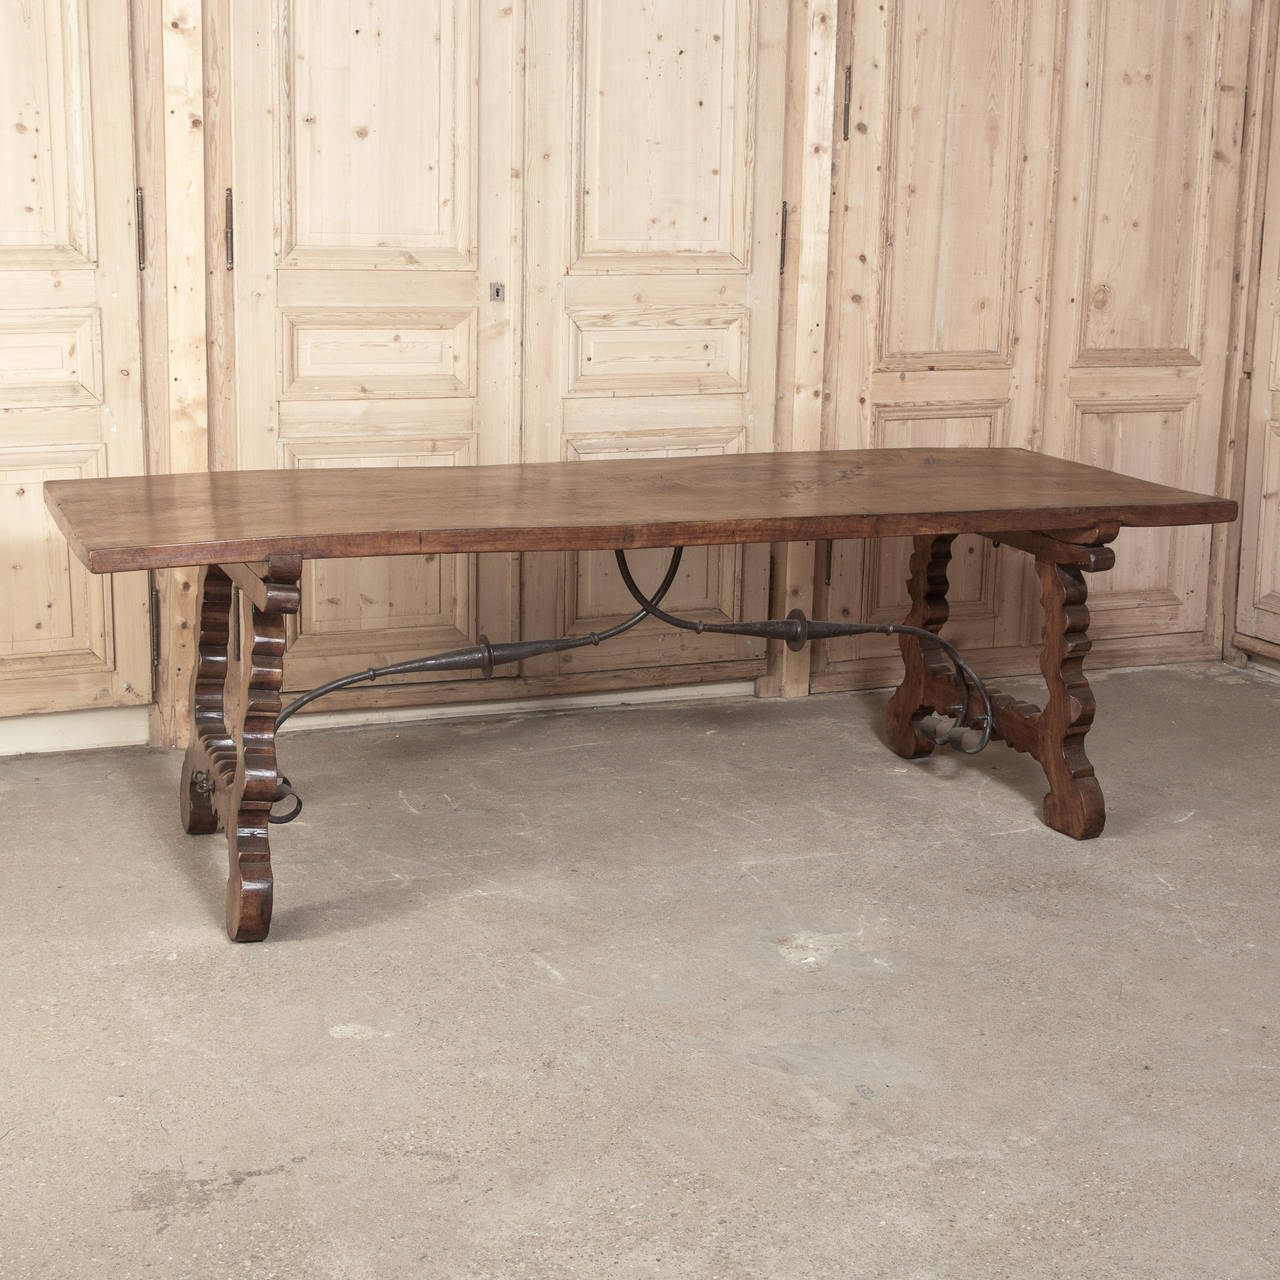 Hand-crafted by master Spanish artisans from Walnut harvested from the Pyrenees, this Antique Dining Table features the classic bandsawn side supports that are dovetailed into the solid plank top.  The wrought iron stretchers below add graceful